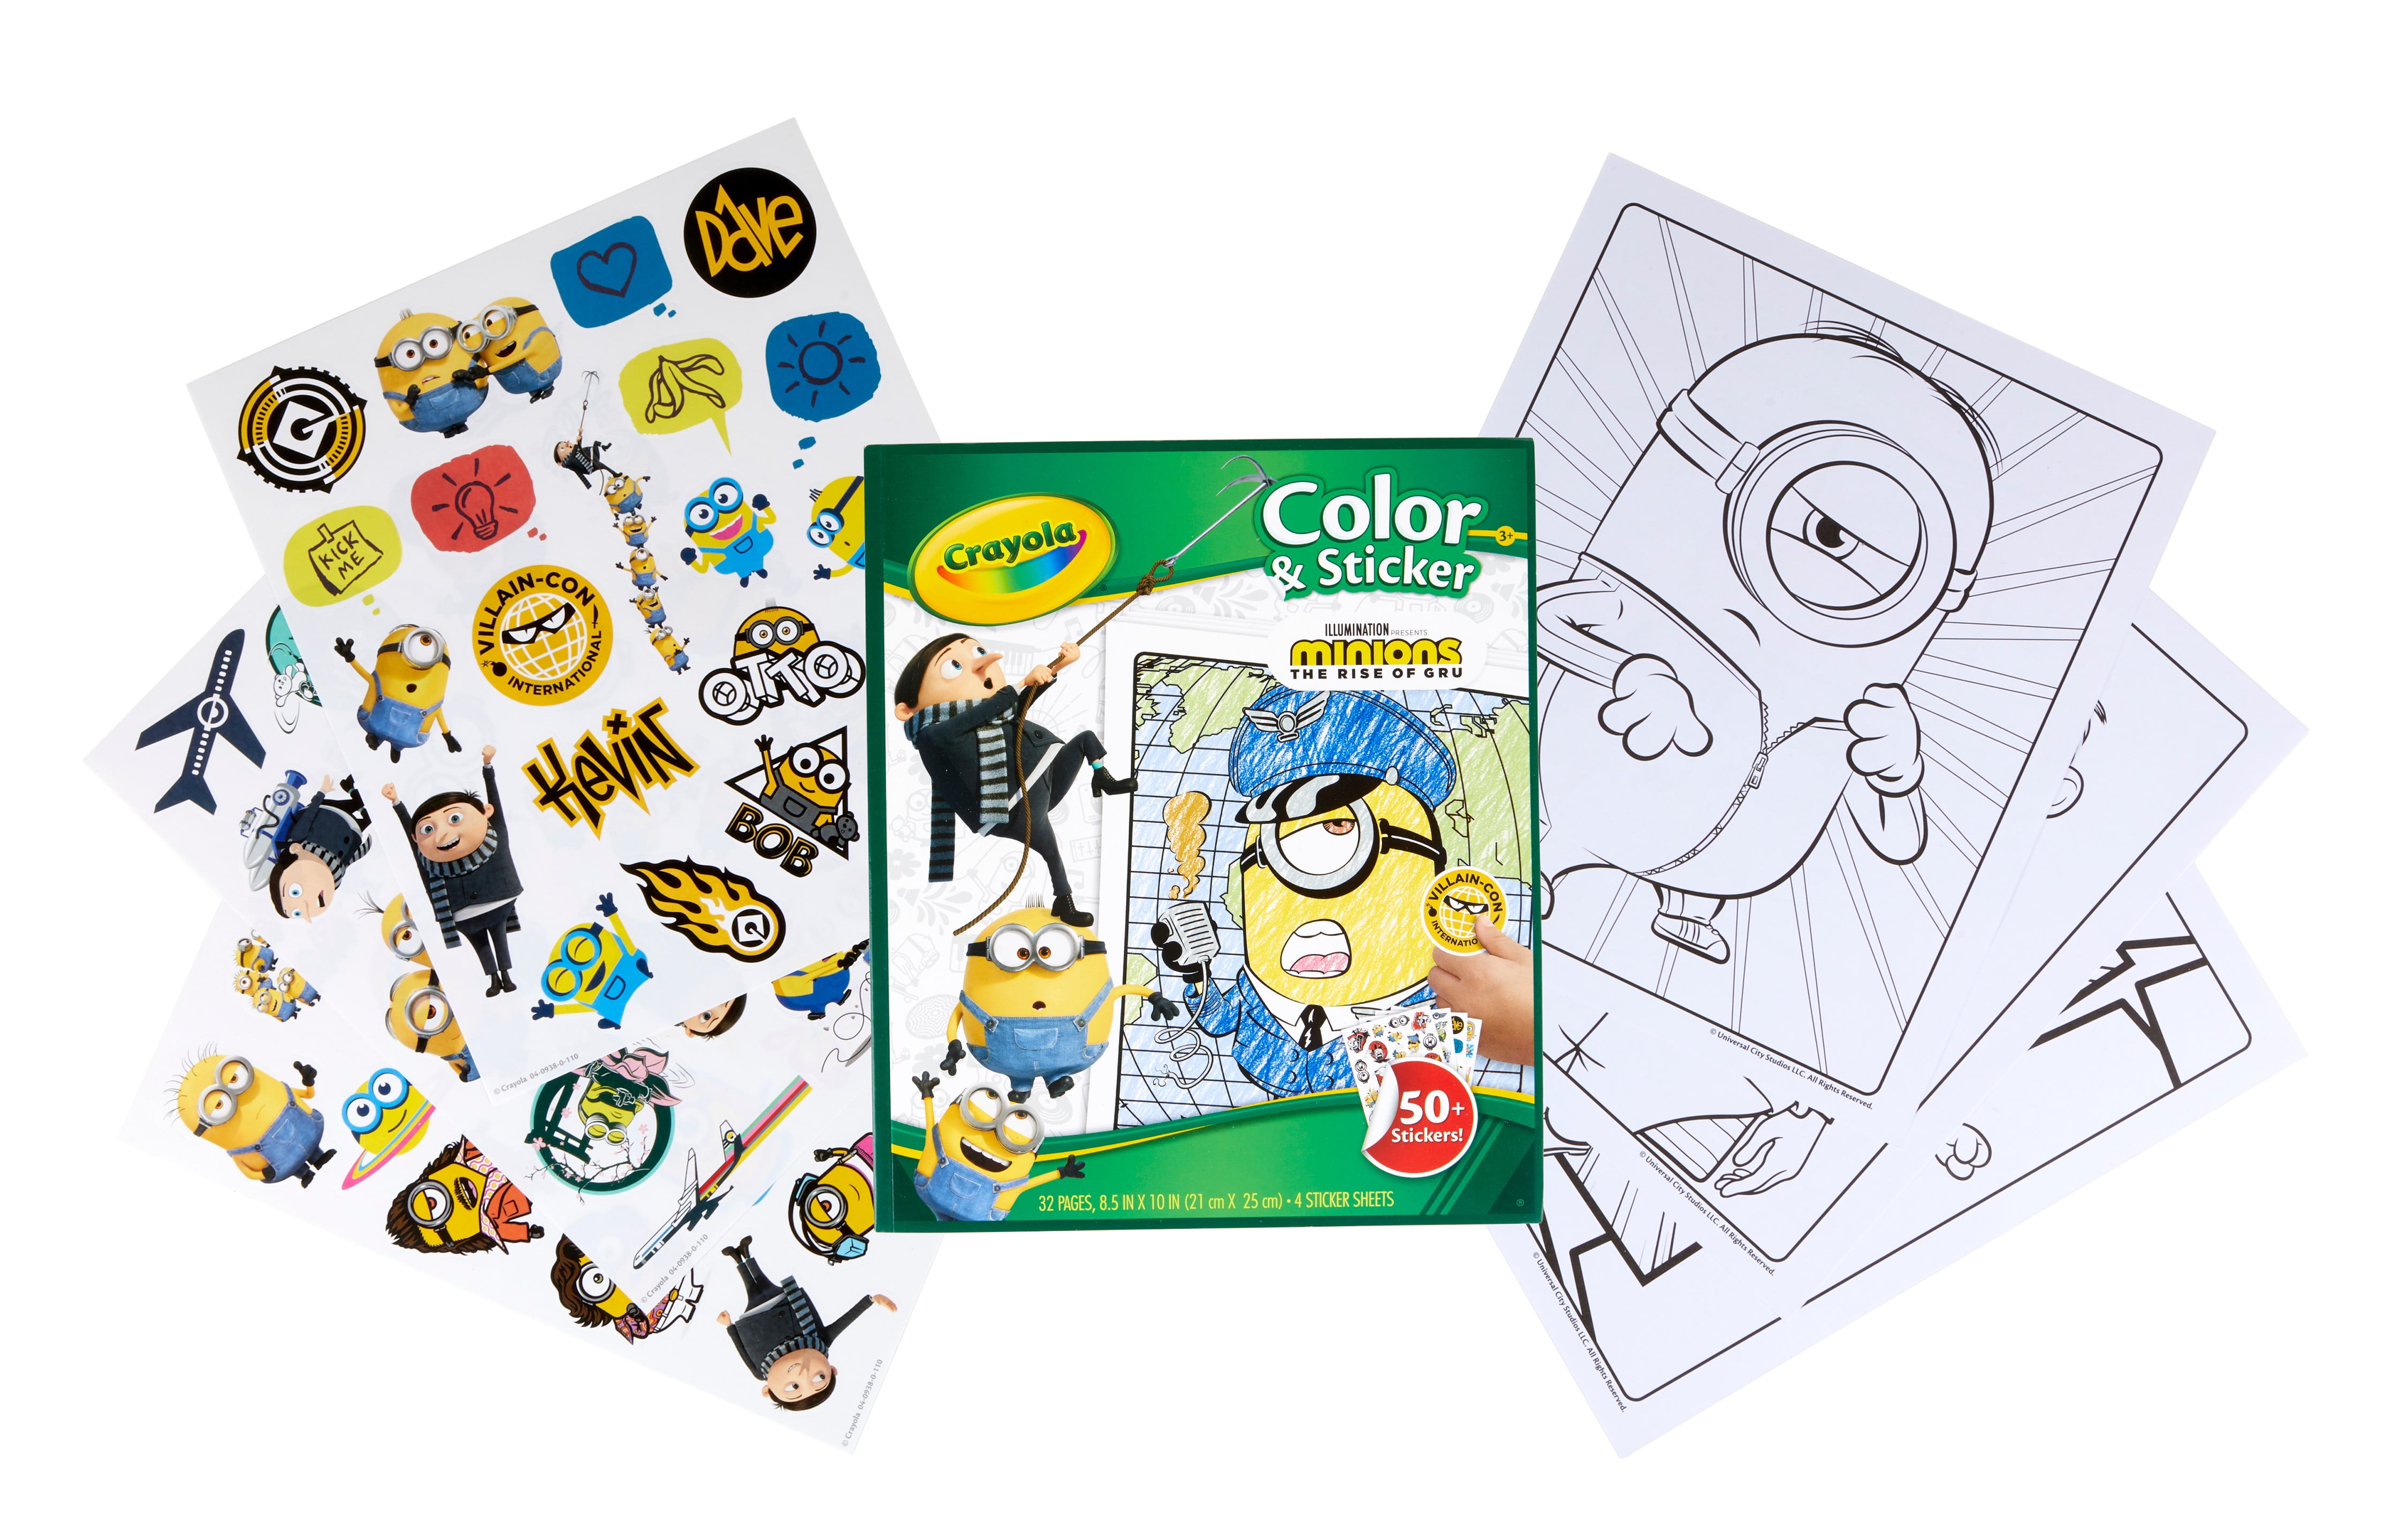 my carry along 50 activities & Giant colouring 100 stickers girls or boys